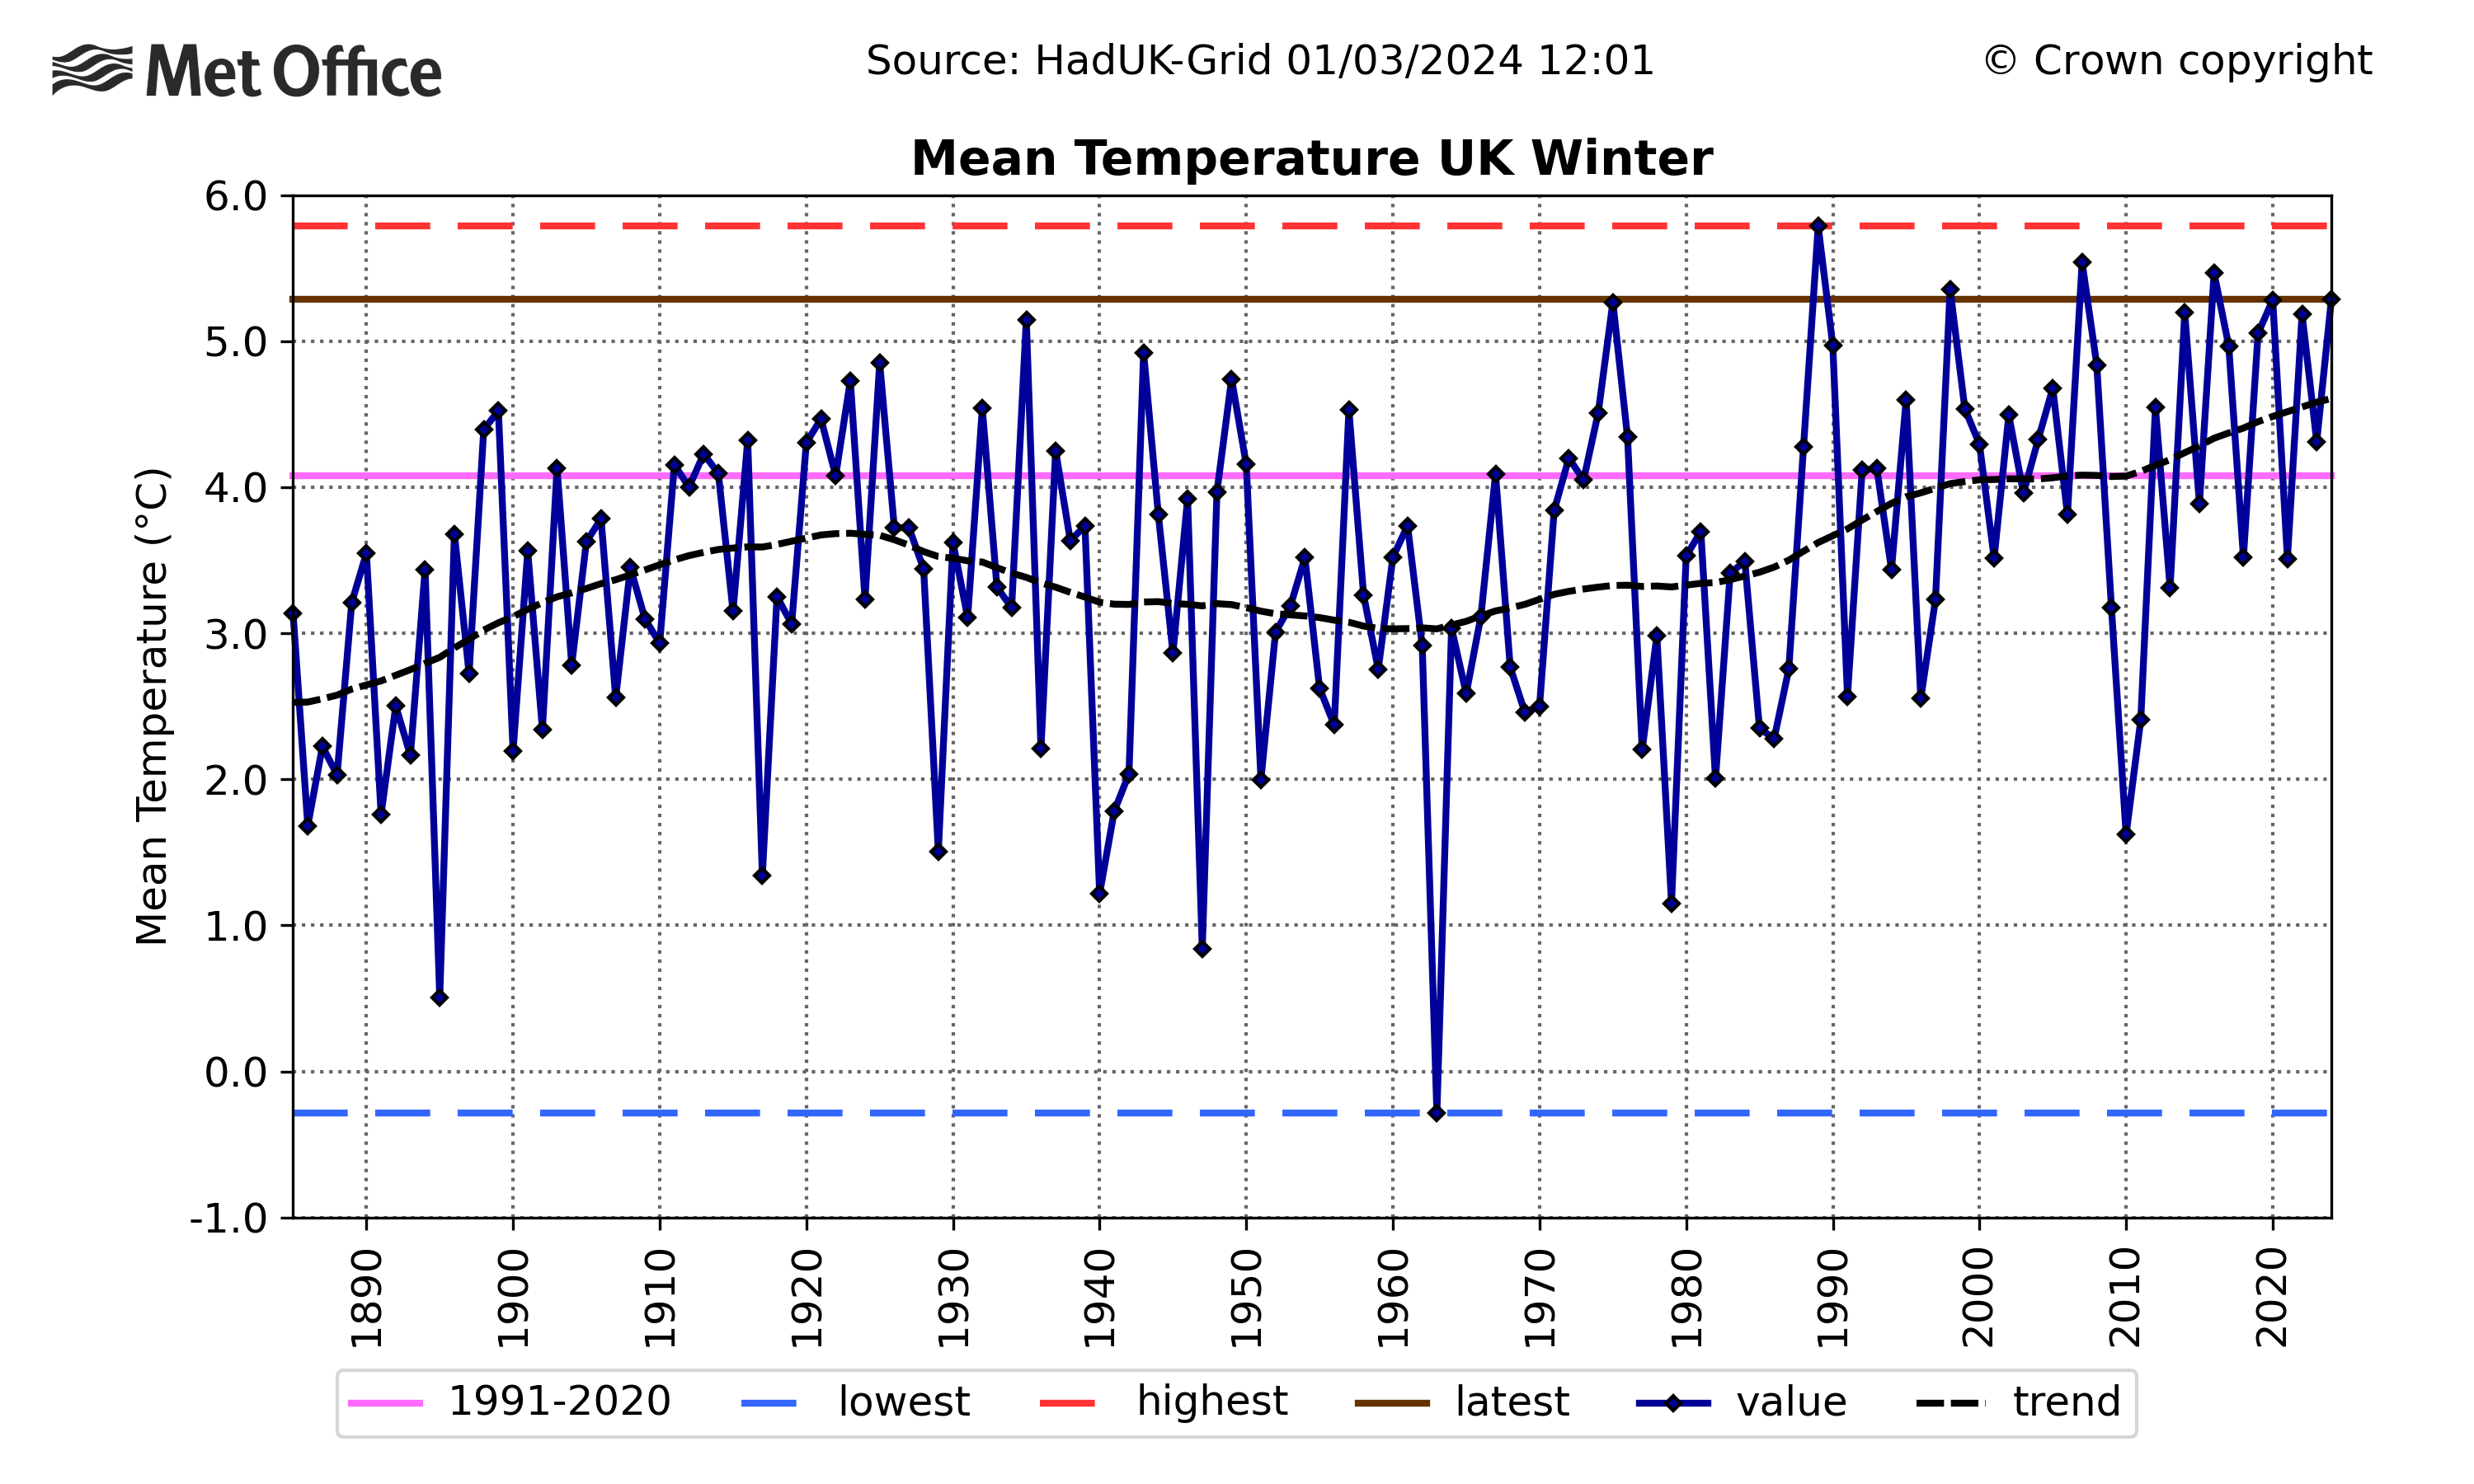 Graph showing UK winter mean temp over time. The graph shows year-to-year variability but an upward trend.